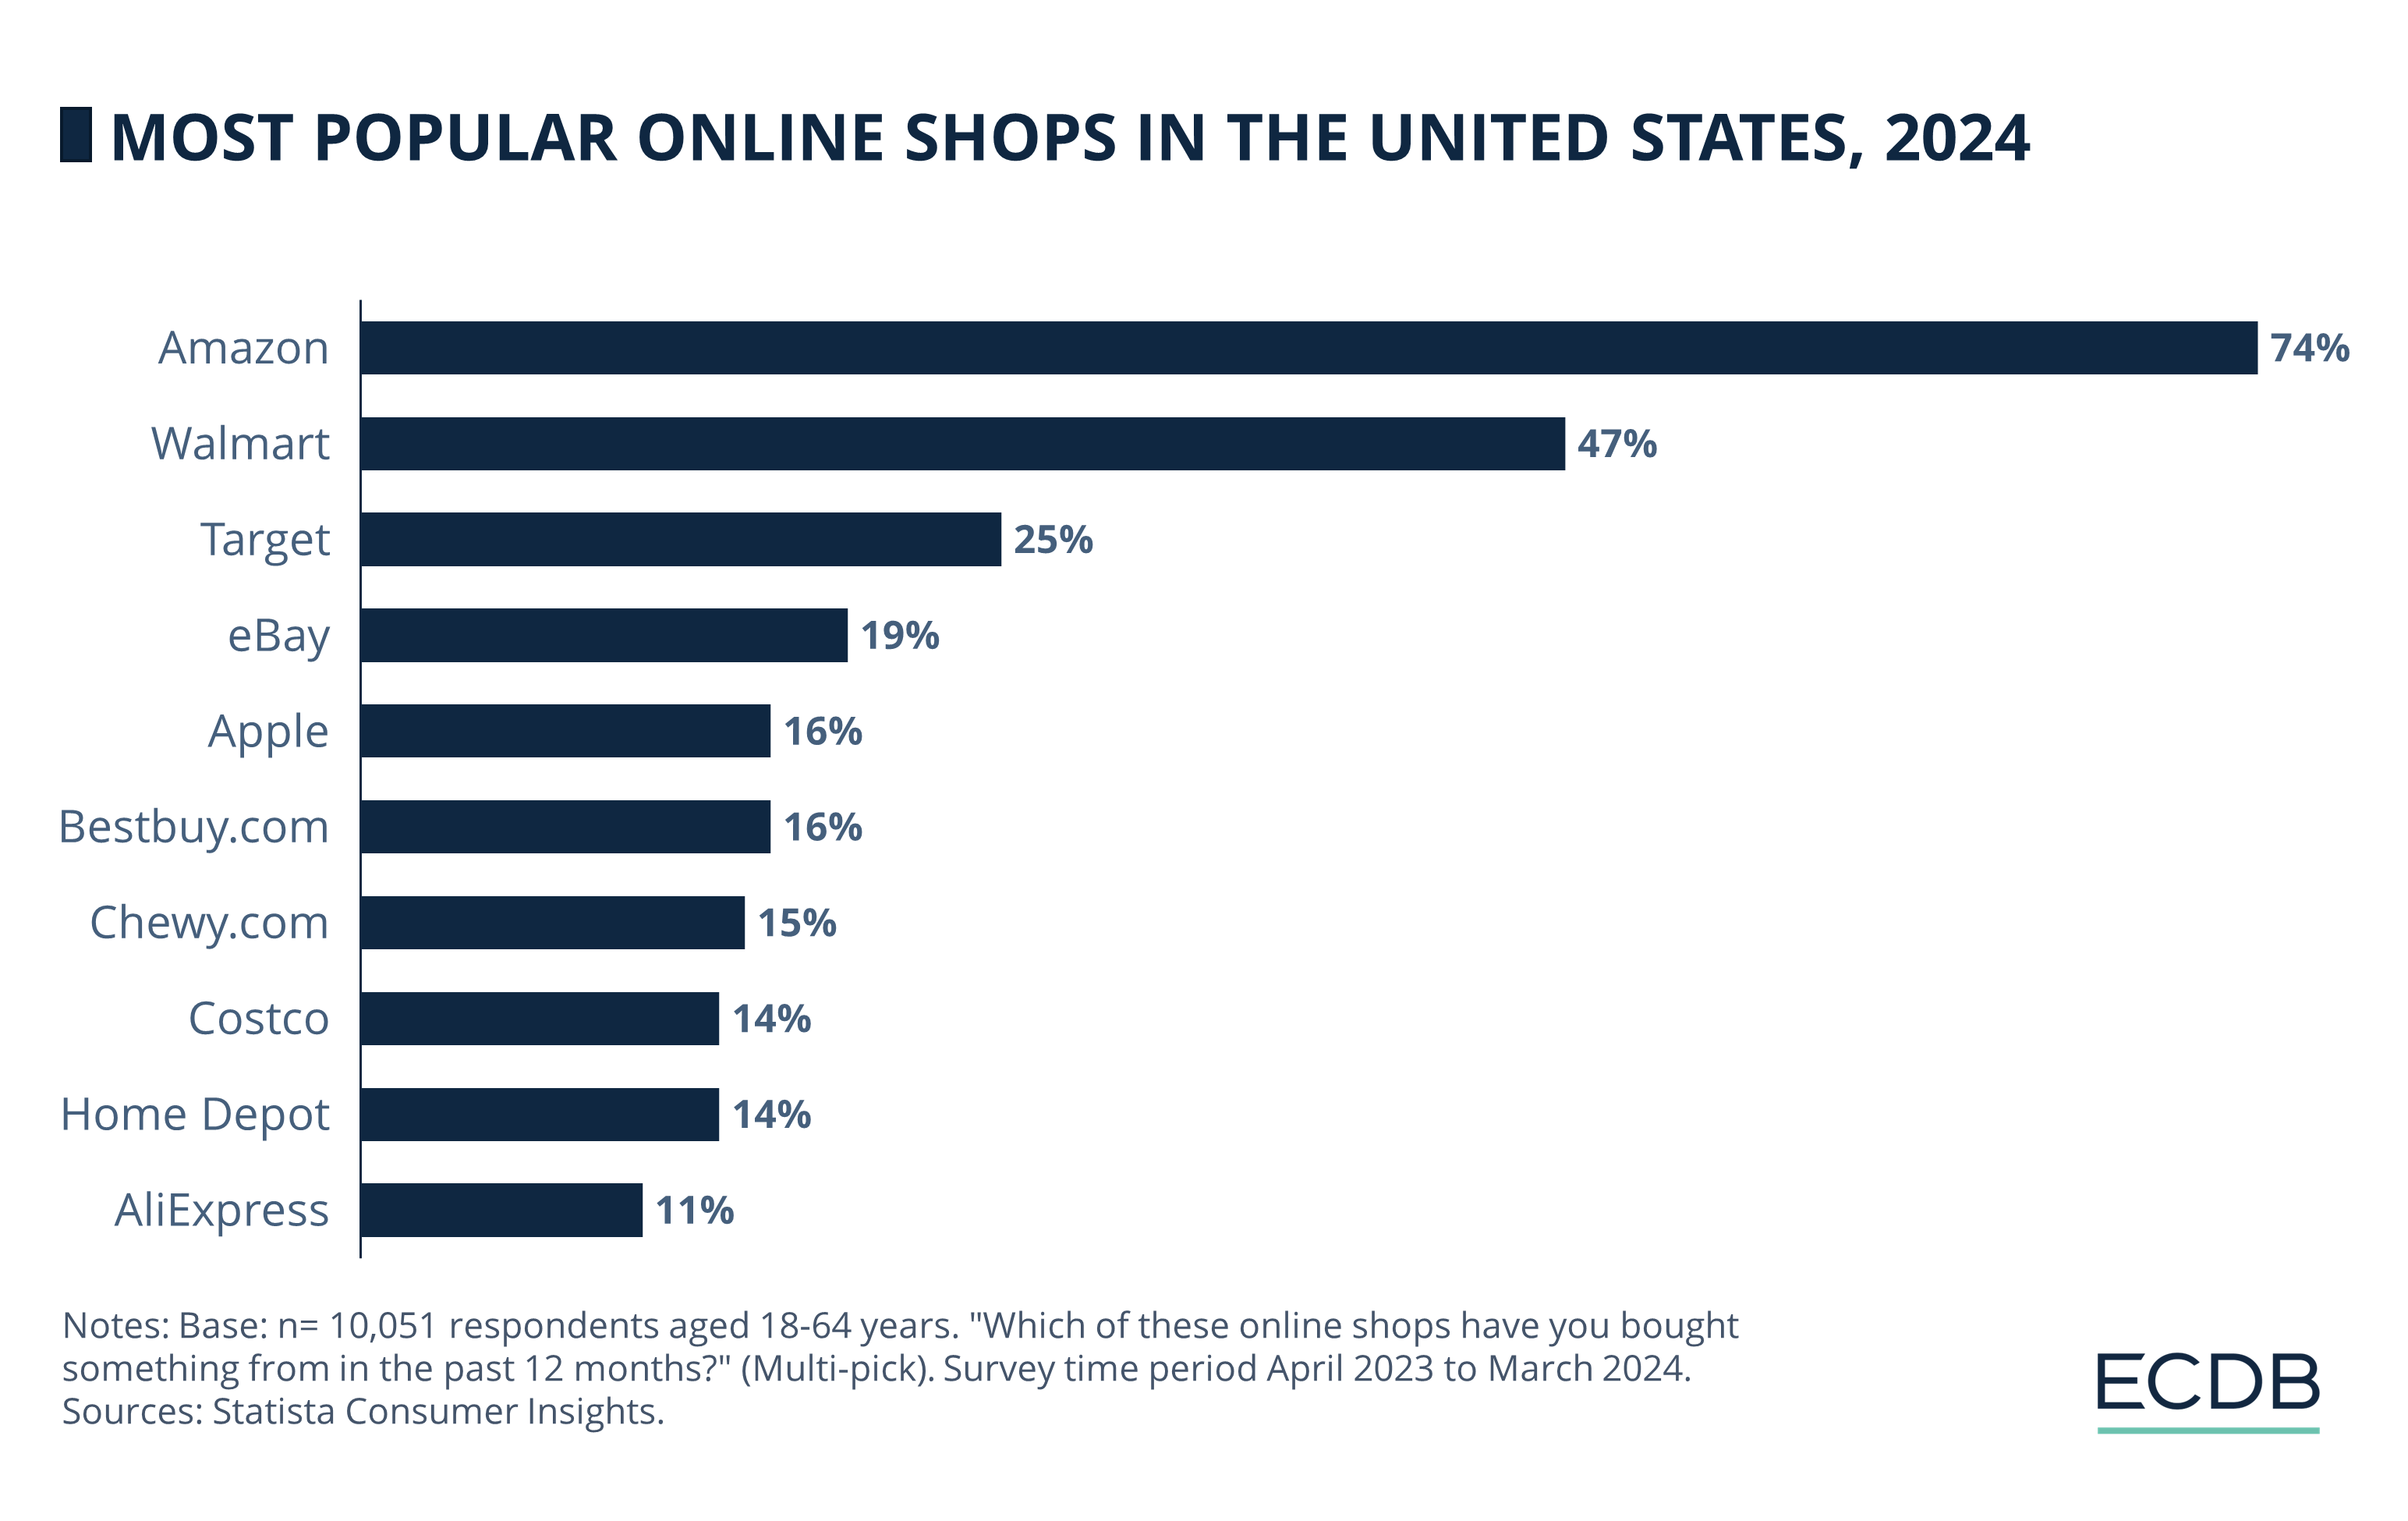 Most Popular Online Shops in the United States, 2024